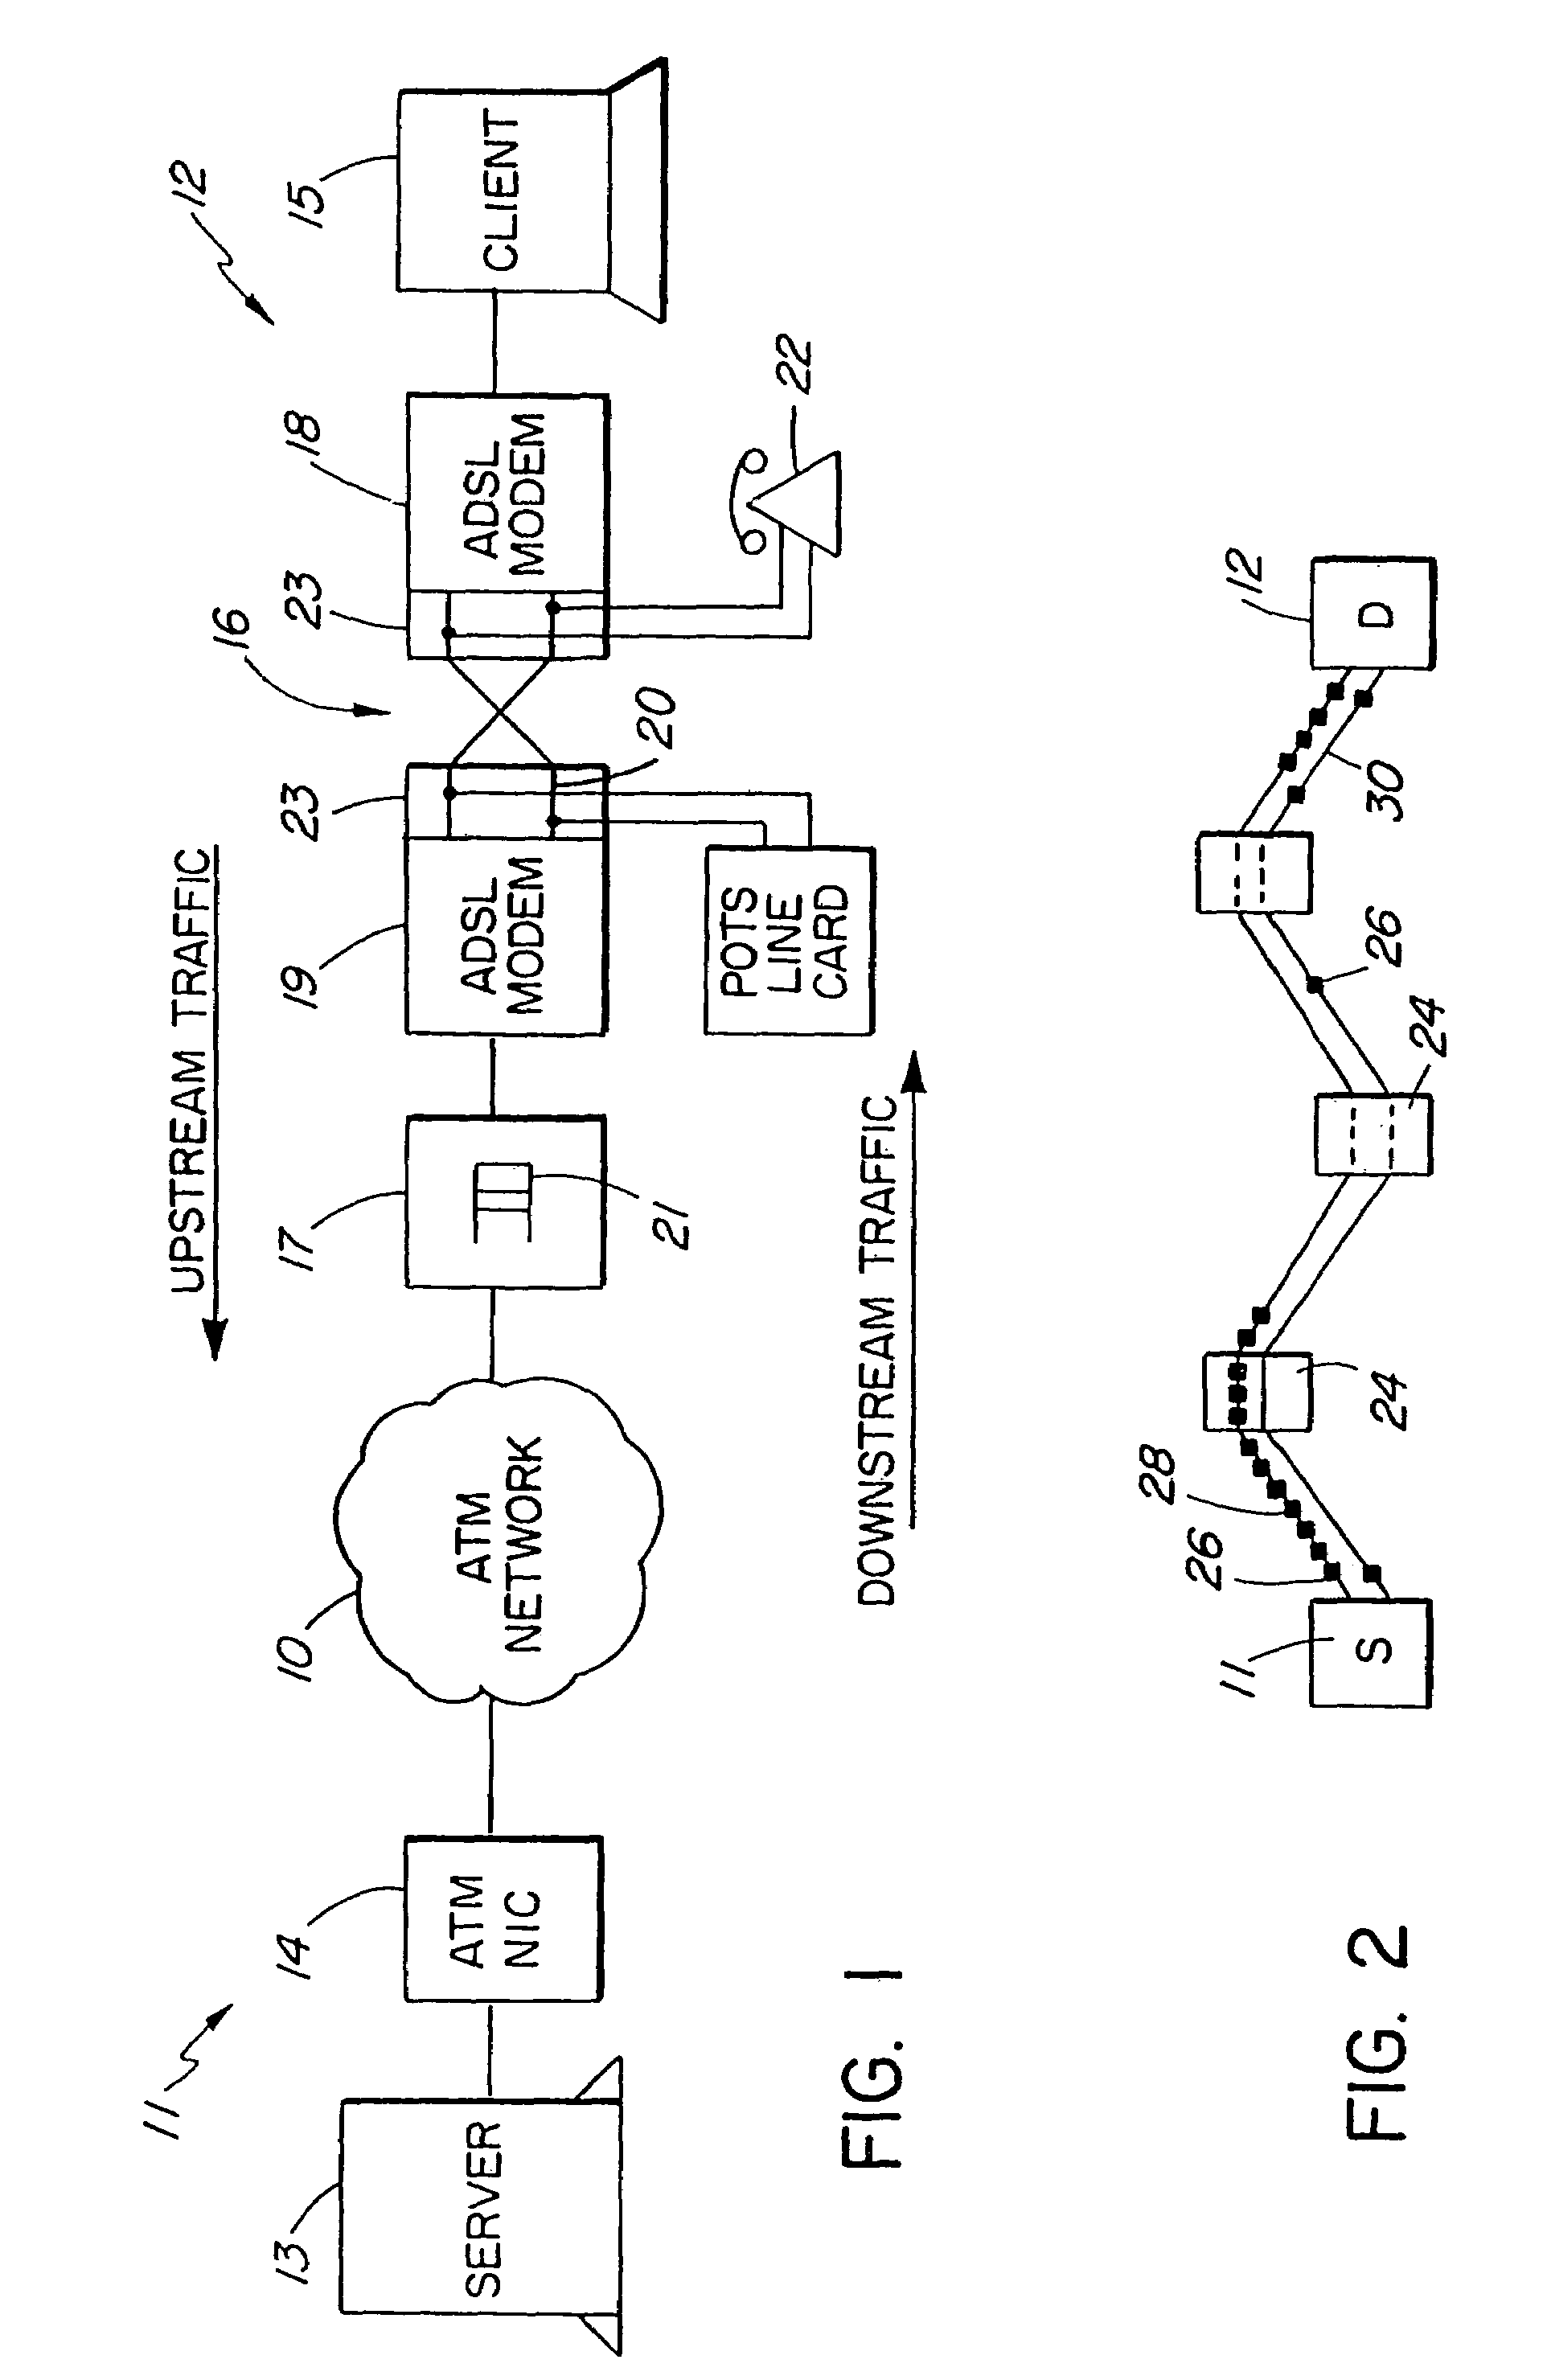 Controlling ATM layer transfer characteristics based on physical layer dynamic rate adaptation